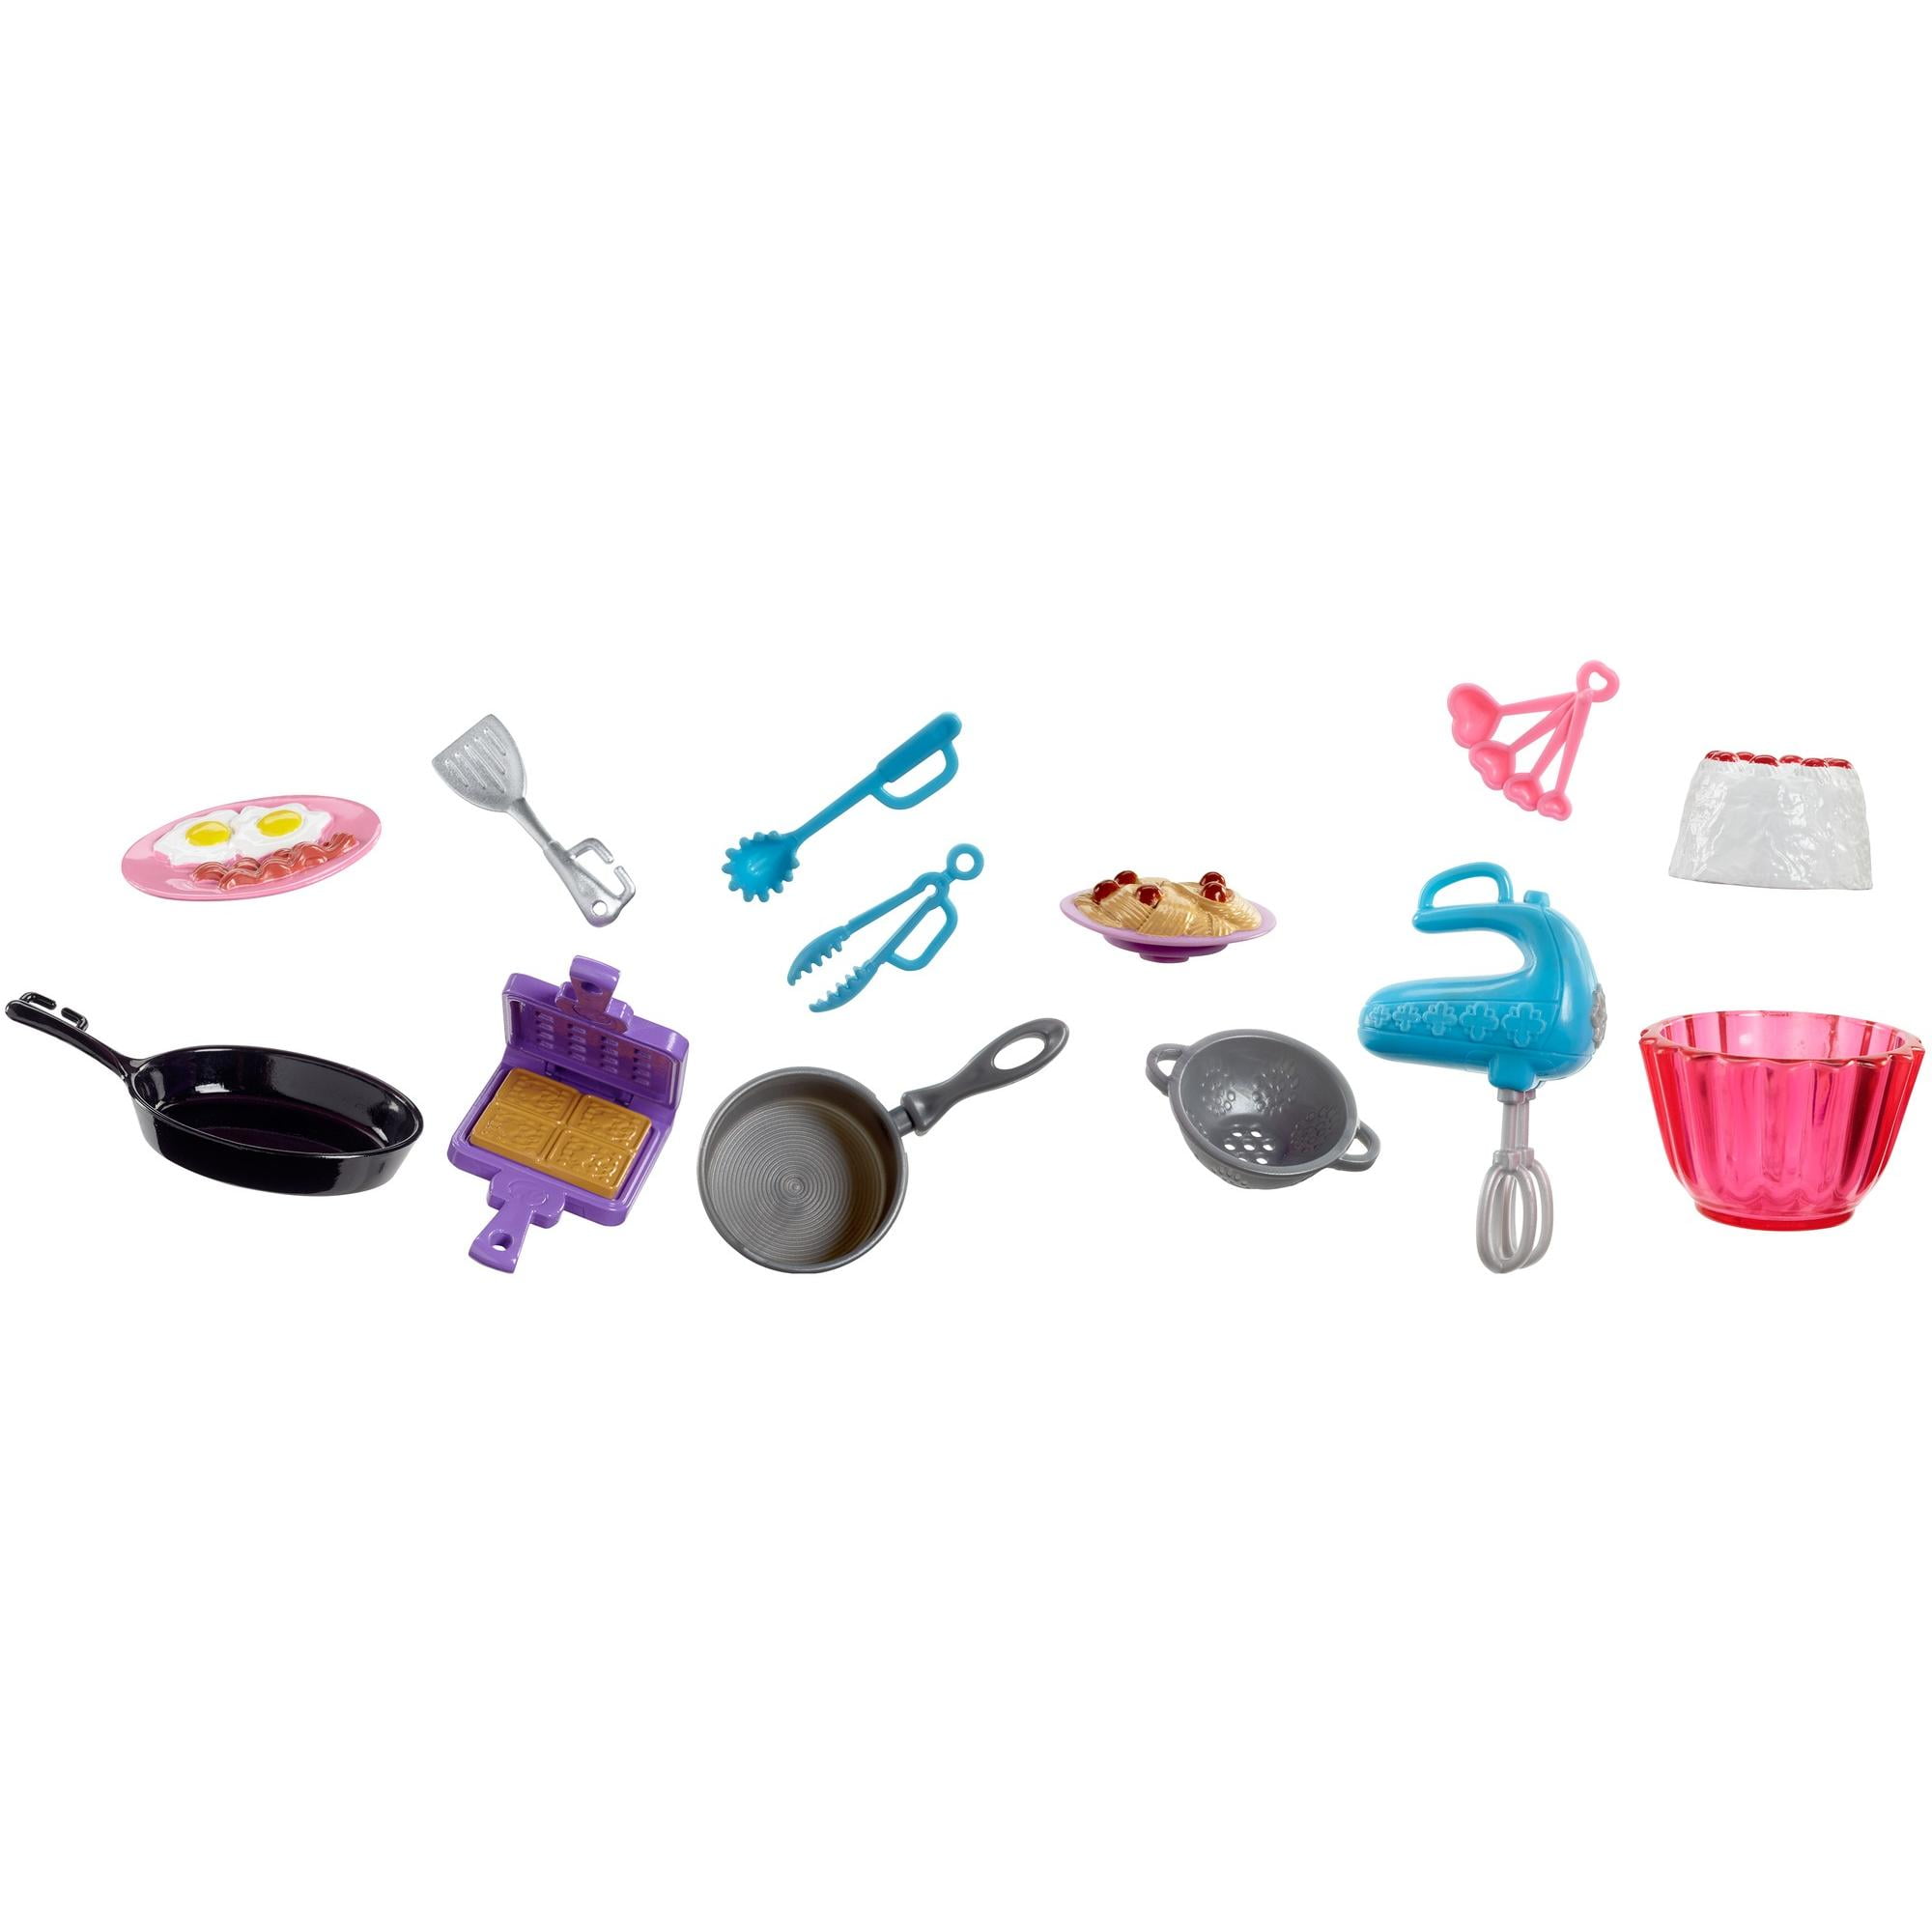 6 Barbie Doll Kitchen Spa & Puppy Accessory Pack Cooking Spaghetti Baking Packs 